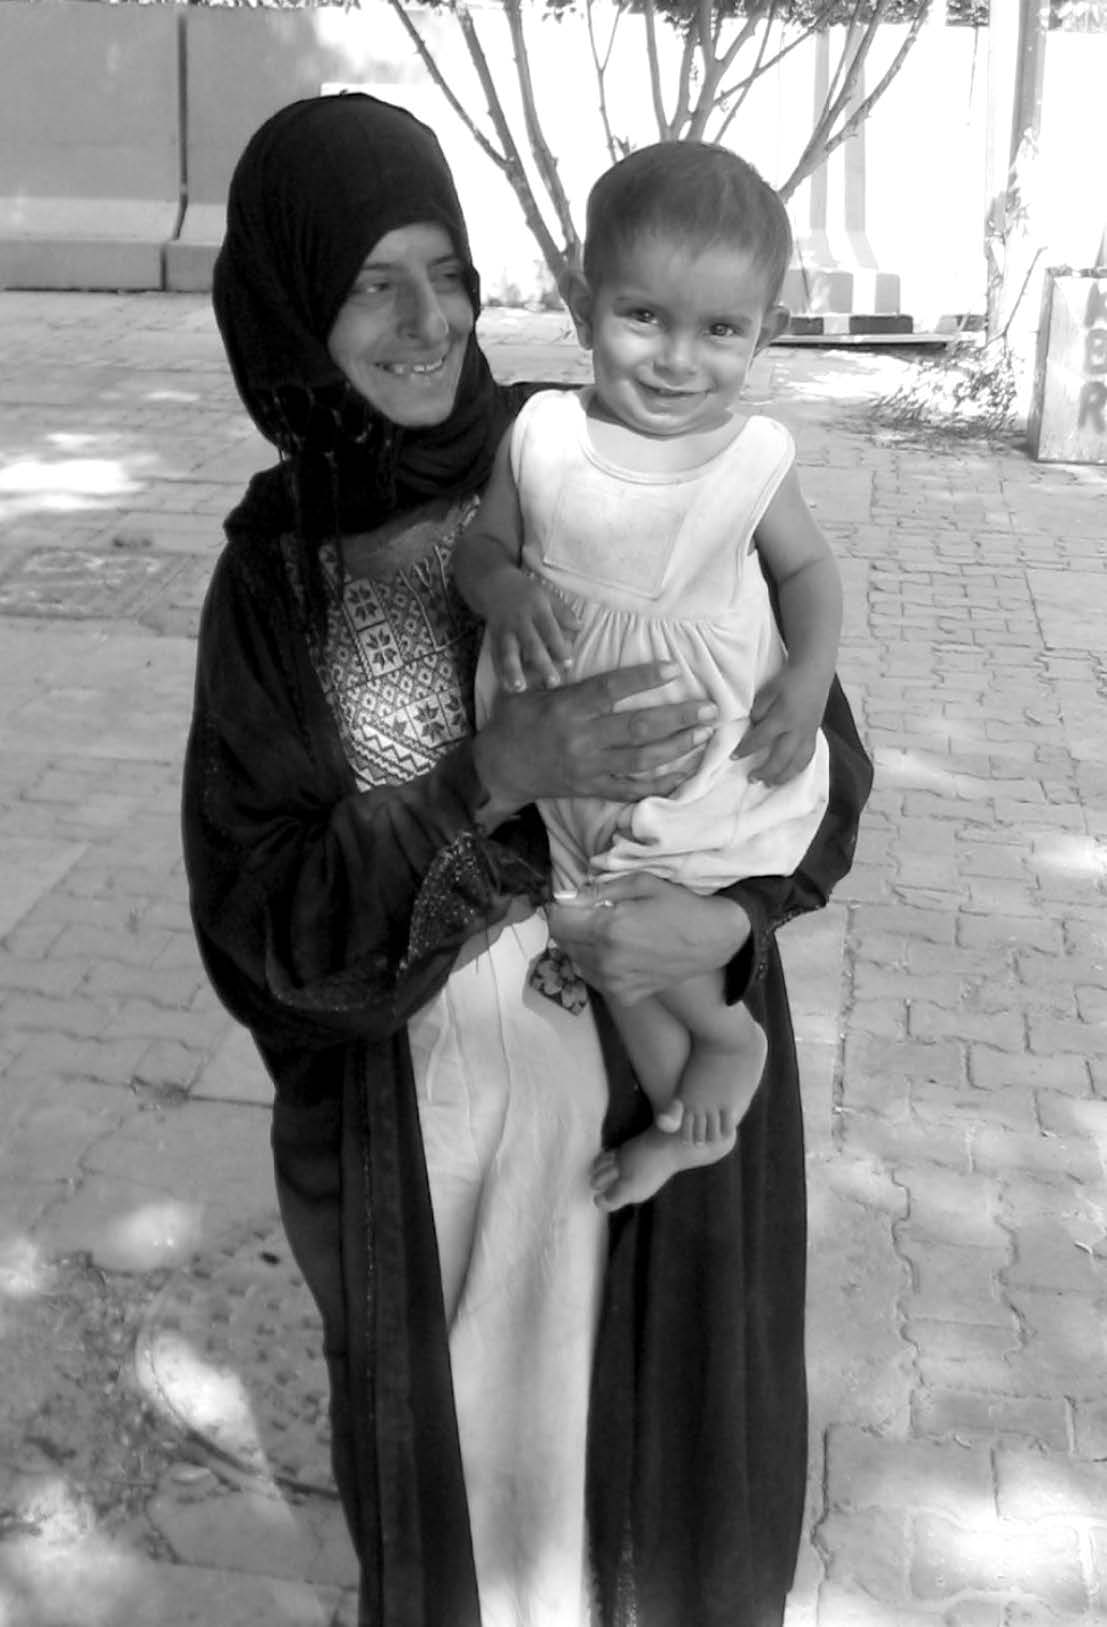 An Iraqi mother and child at a Baghdad bazaar. Courtesy of Michael McMaken.